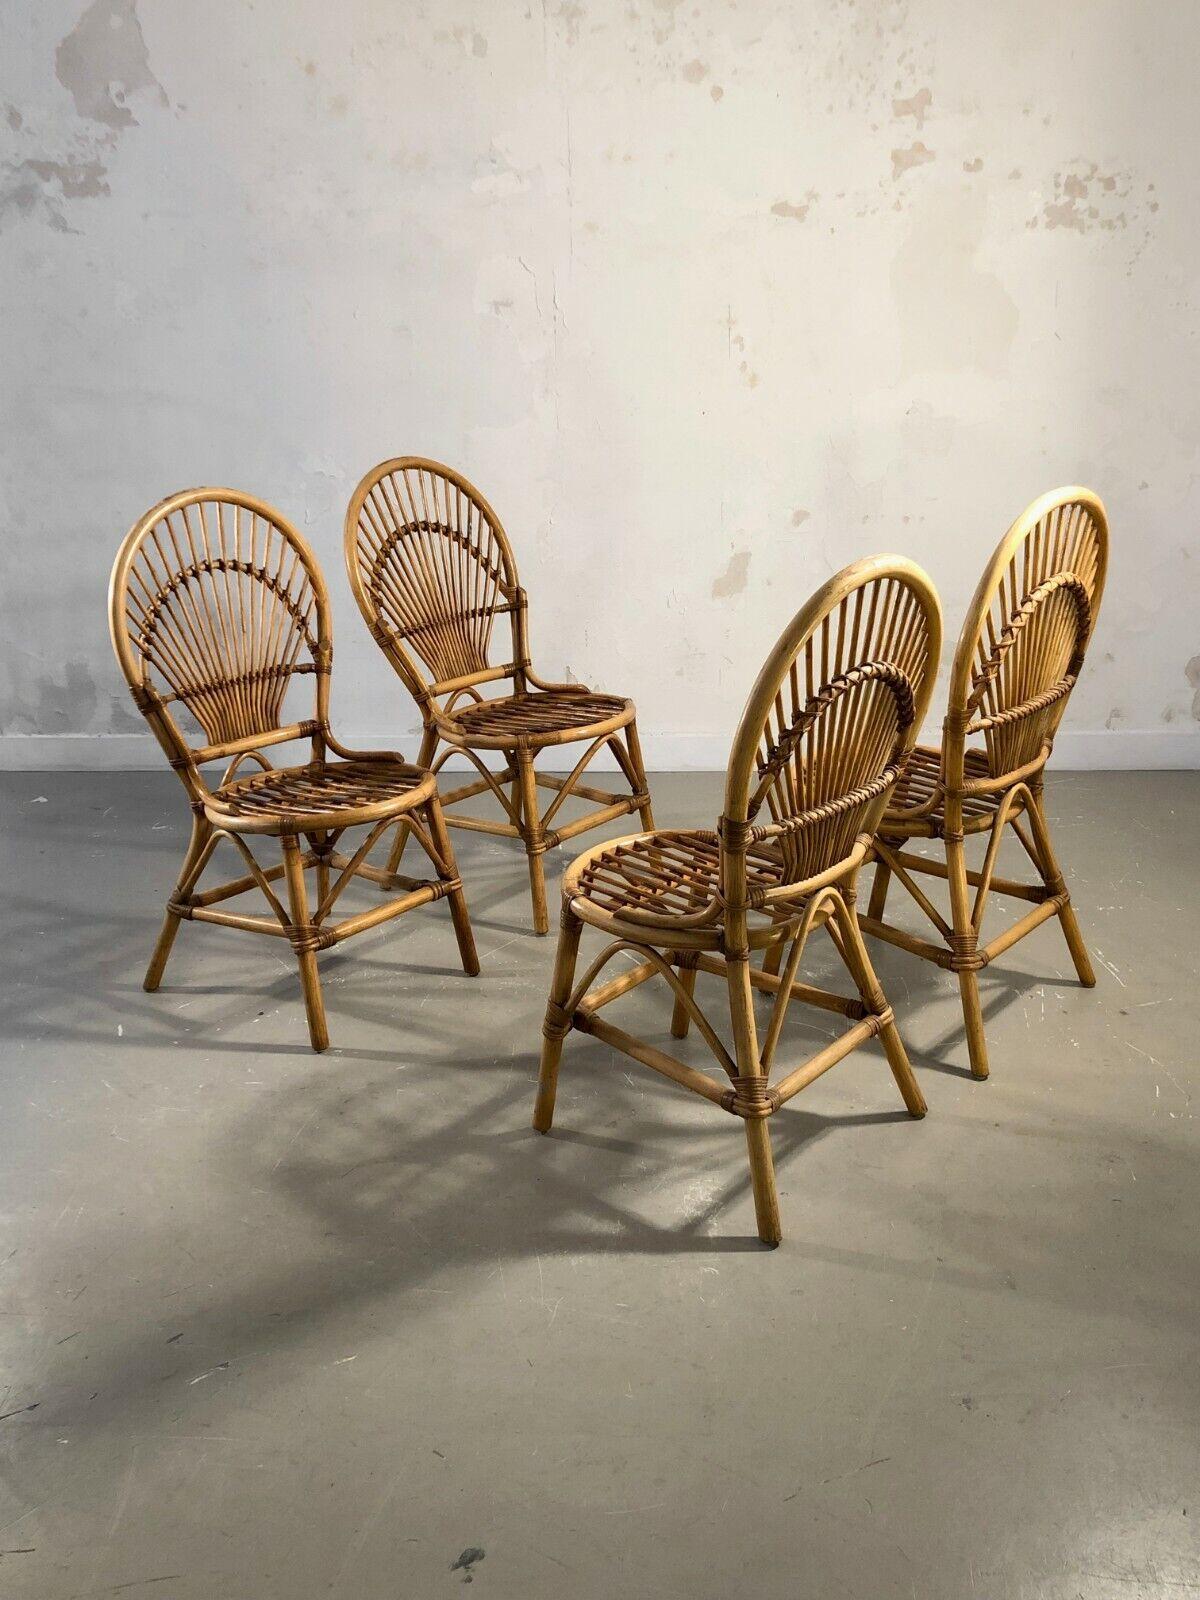 A Set of 4 SHABBY-CHIC BAMBOO Chairs in AUDOUX-MINNET Style, France 1970 For Sale 2